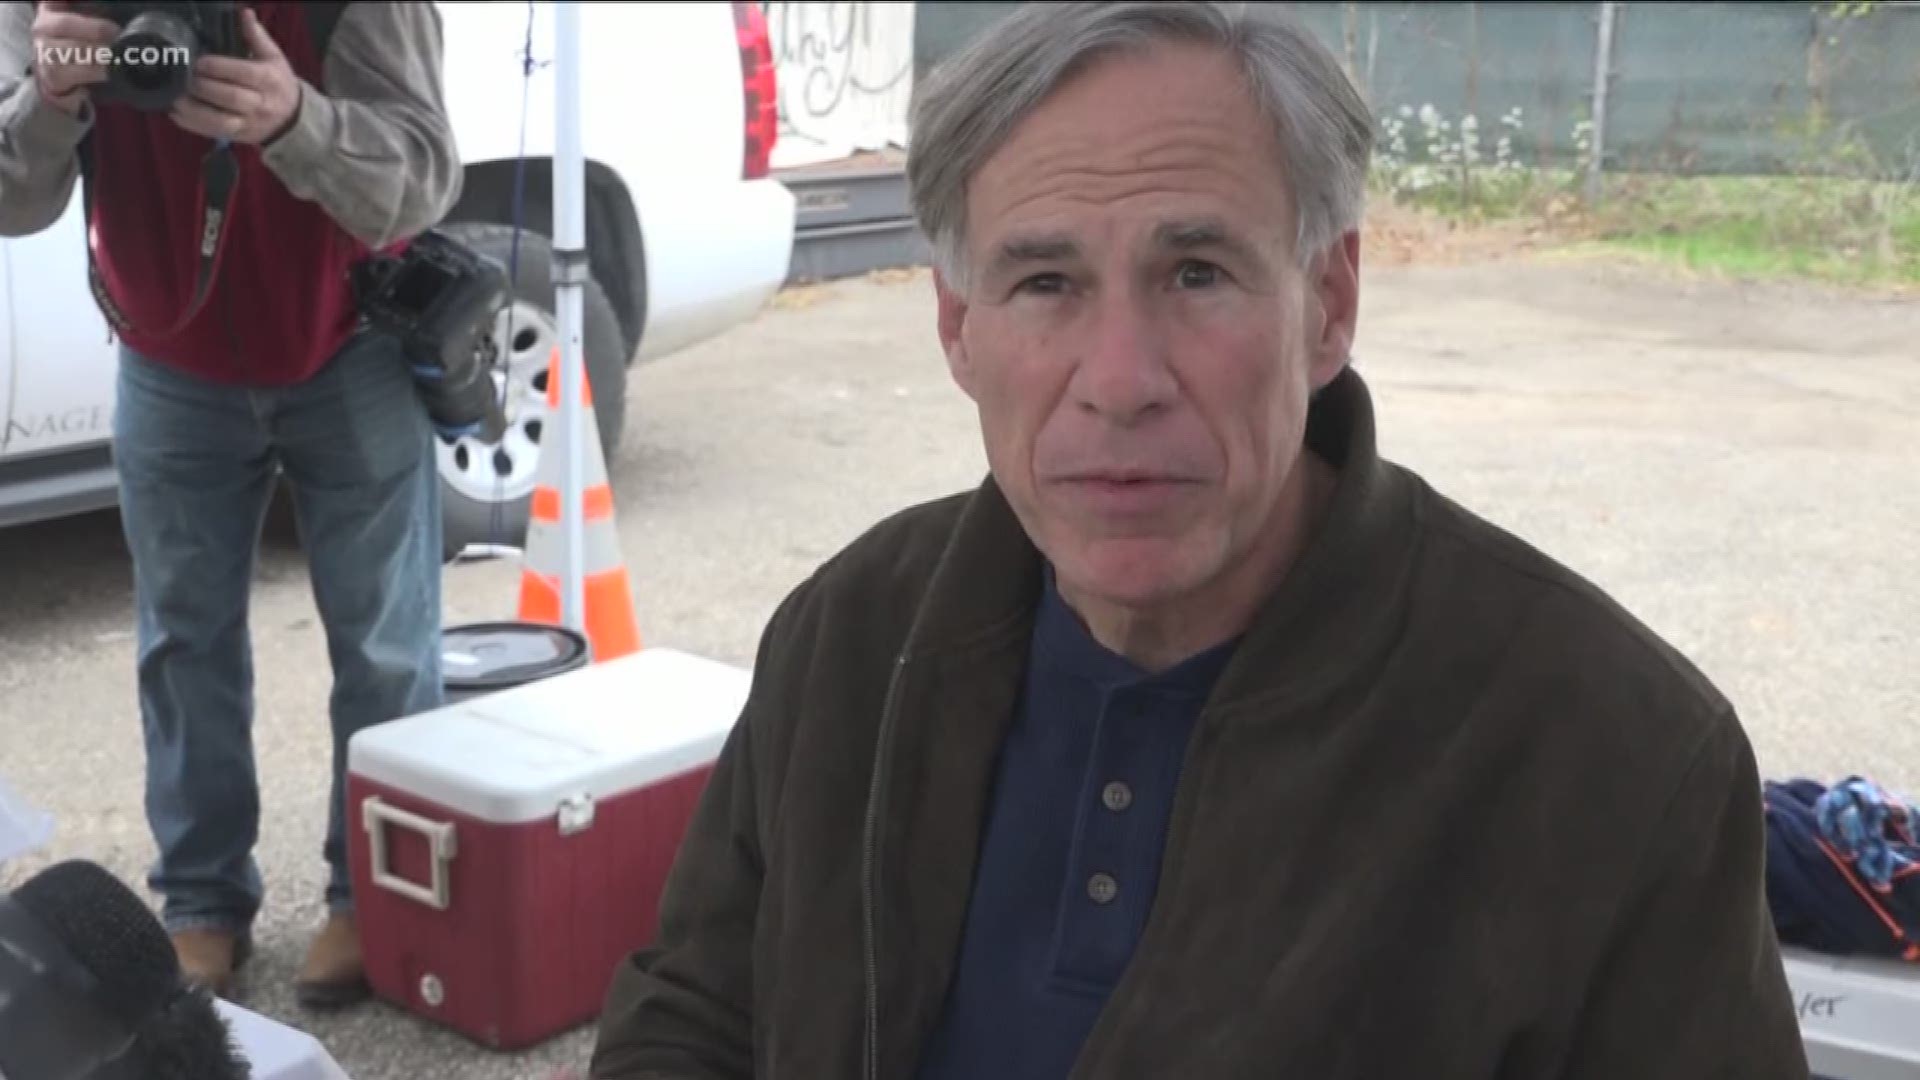 Gov. Greg Abbott and his wife, Cecilia, helped provide meals to those in need on Thanksgiving morning.